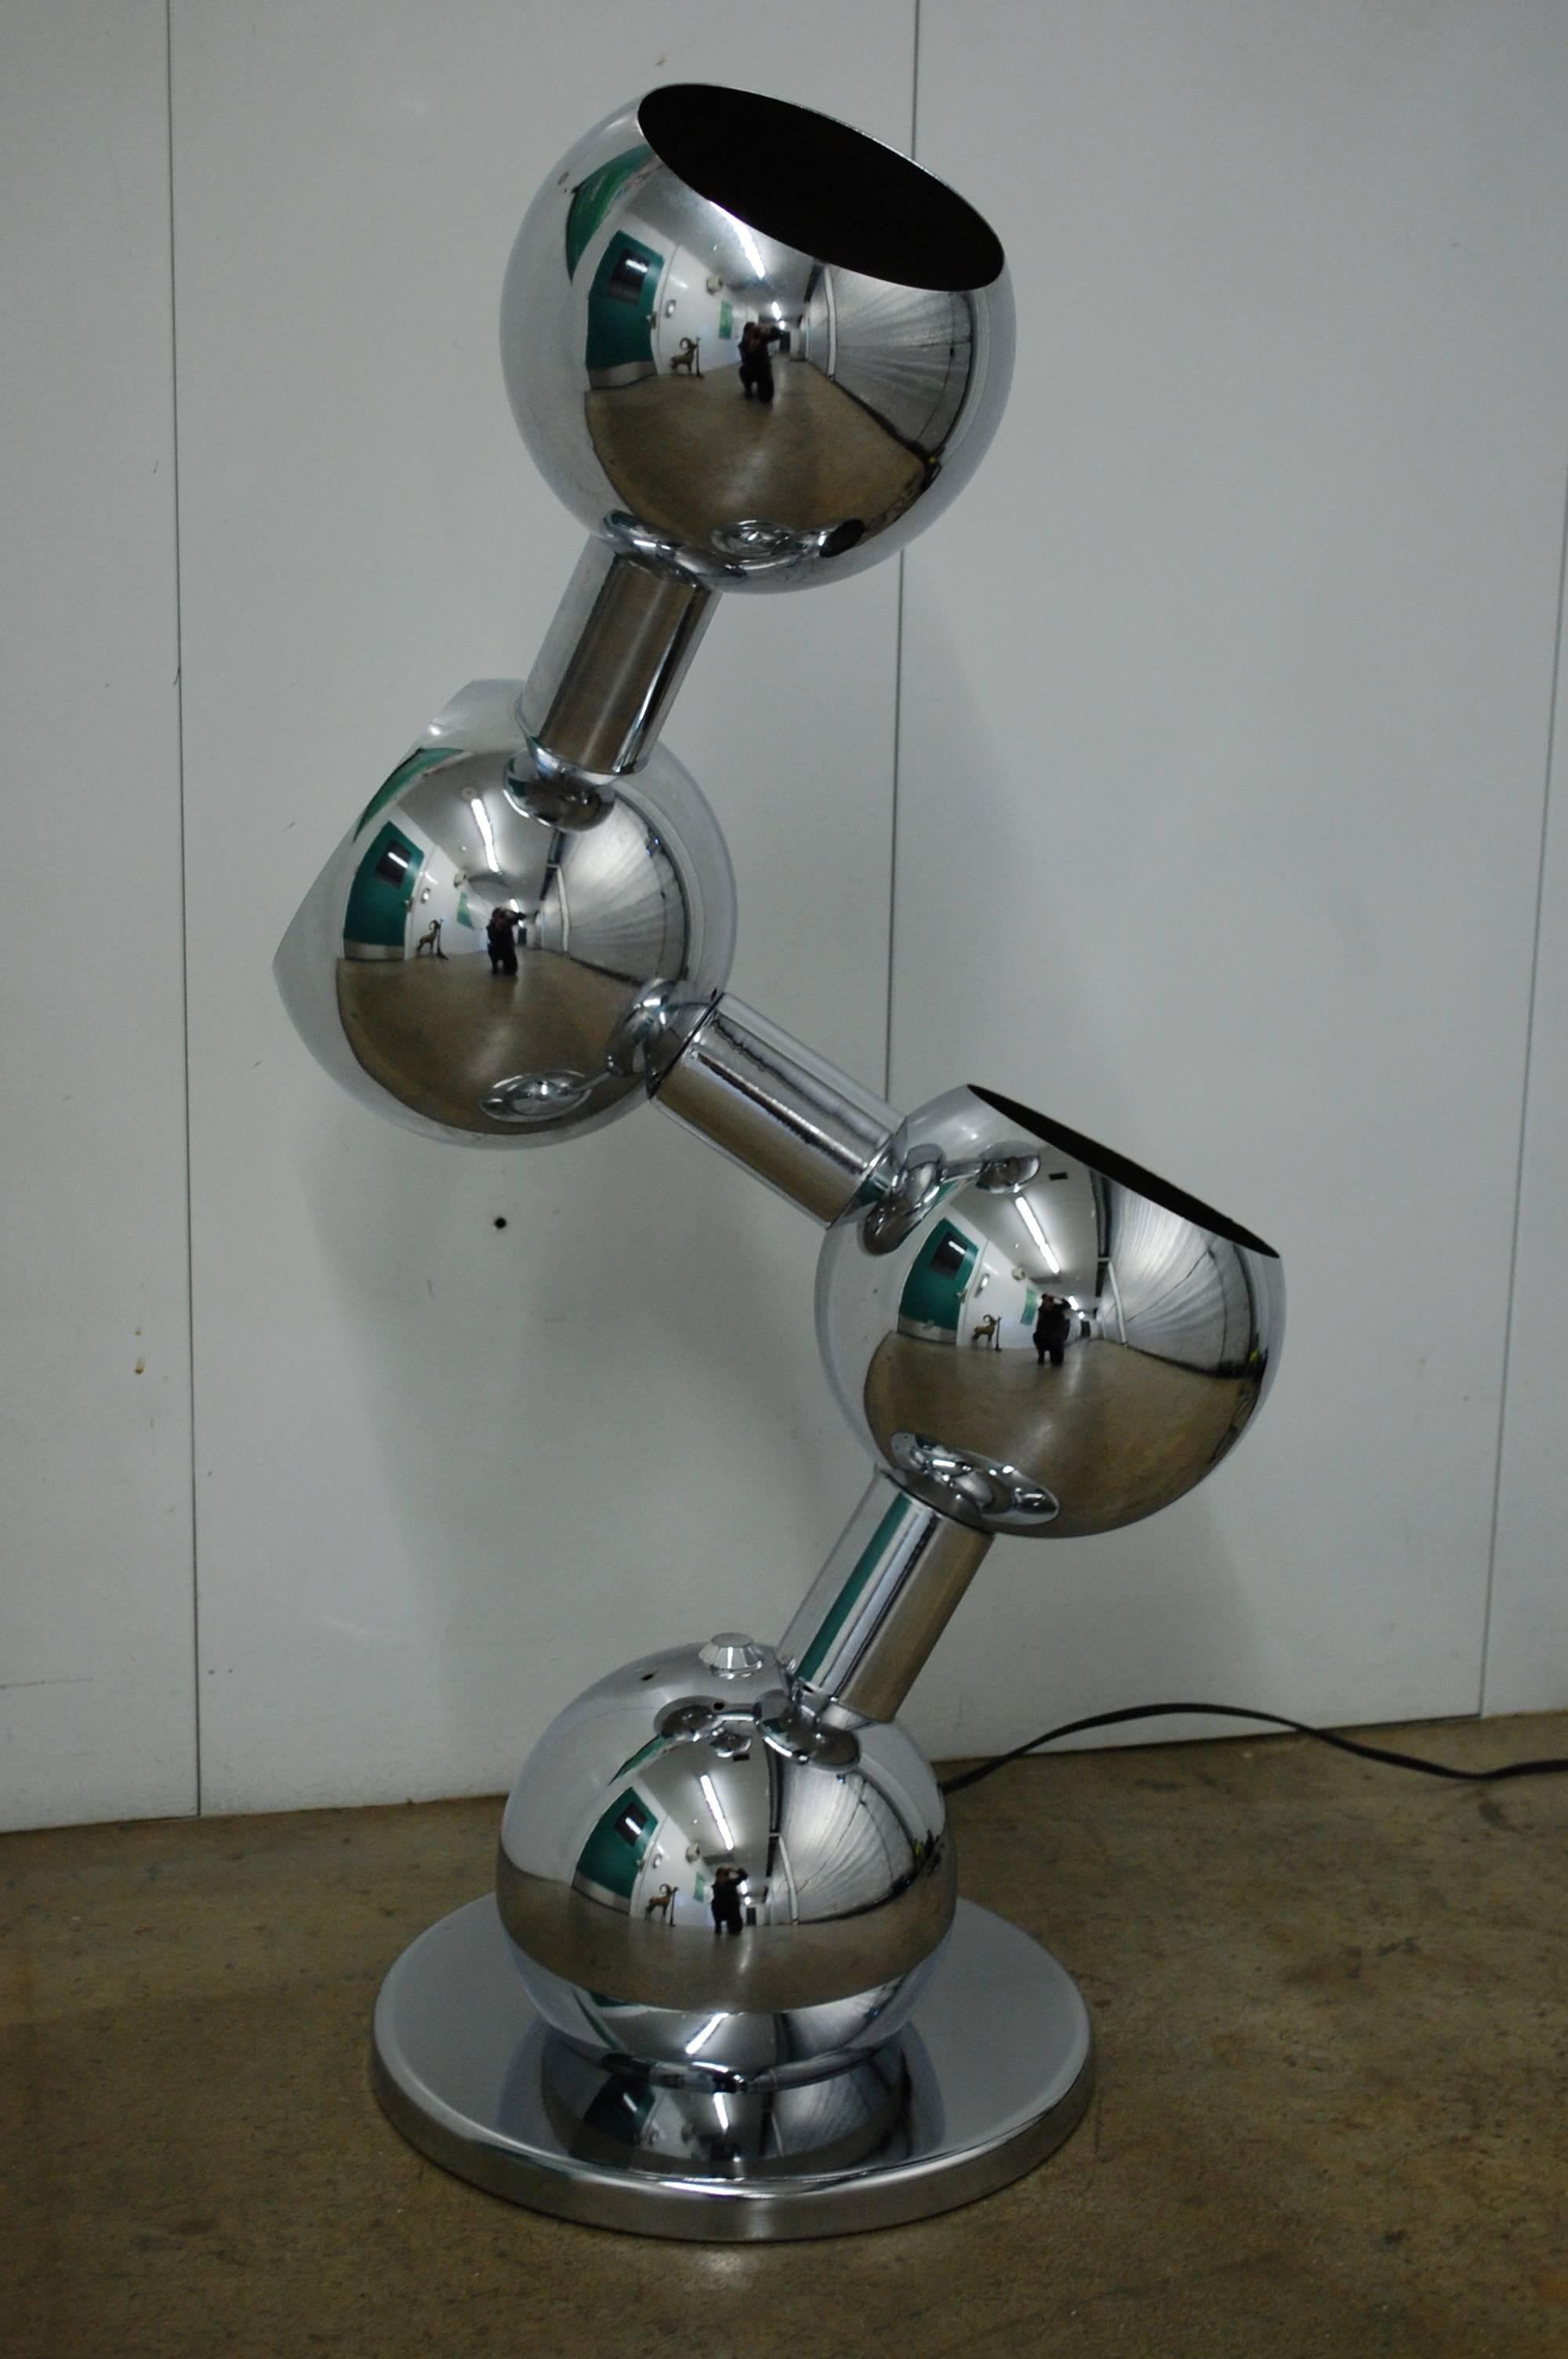 Mid-Century Modern chrome atomic articulating lamp by Robert Sonneman. Switch allows for single light or all three lit option and illuminates well.